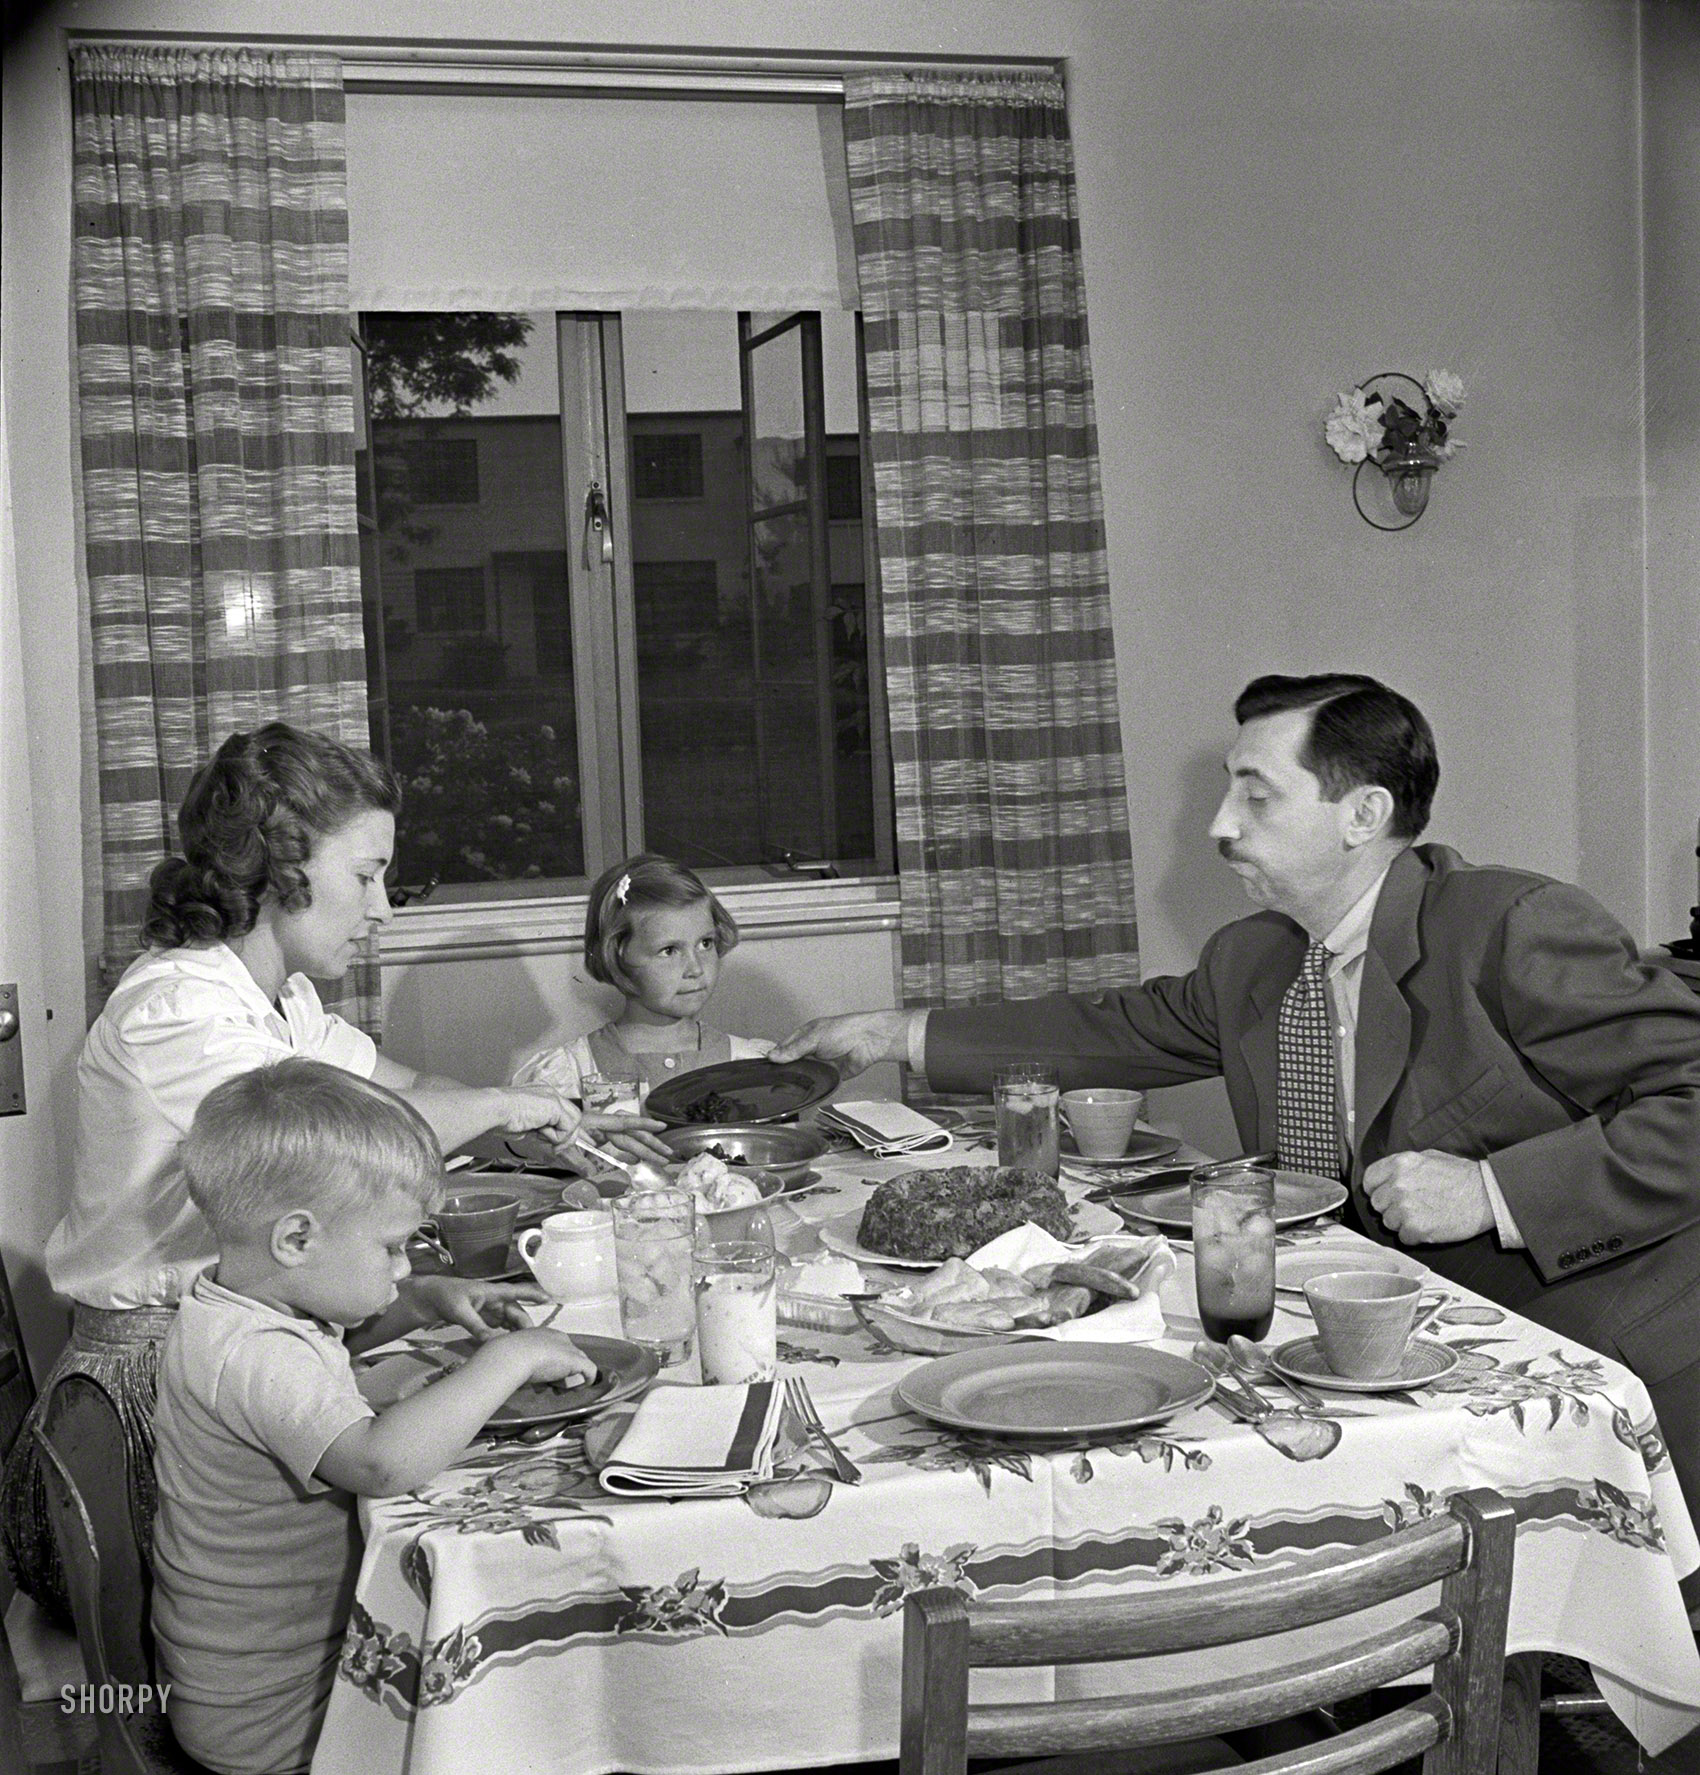 May 1942. Greenbelt, Maryland. Back at the Dream Kitchen table. "Federal housing project. Mr. and Mrs. Leslie Atkins, Ann, and Pierce Atkins having supper." Photo by Marjory Collins, Office of War Information. View full size.